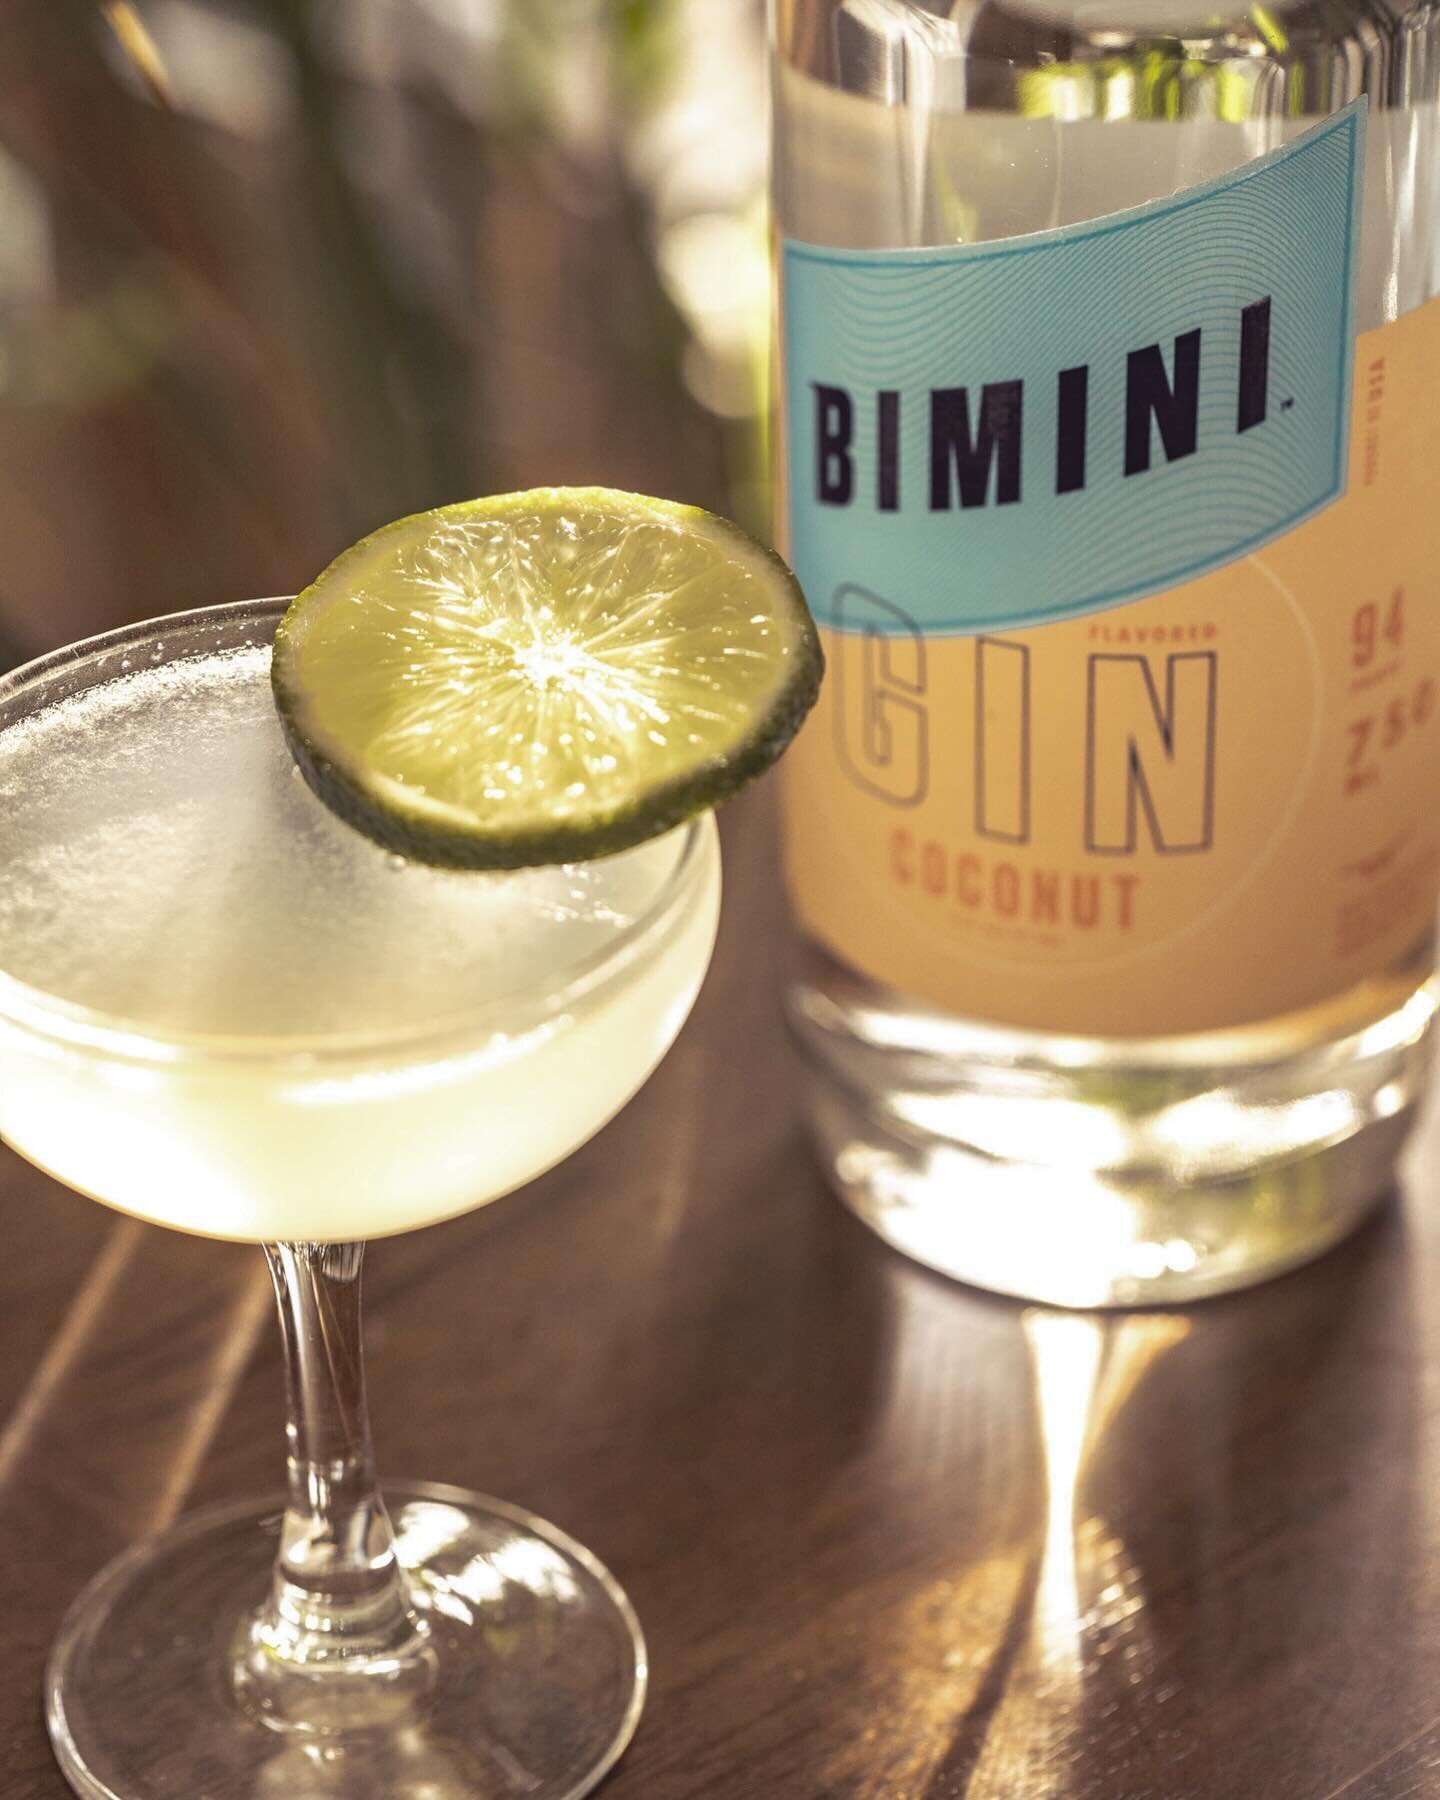 With its dry and subtle coconut flavor, Bimini Coconut takes your favorite gin drinks on a quick trip to the tropics. 🏝️
Try it in a Gimlet for a refreshing new twist on a classic!